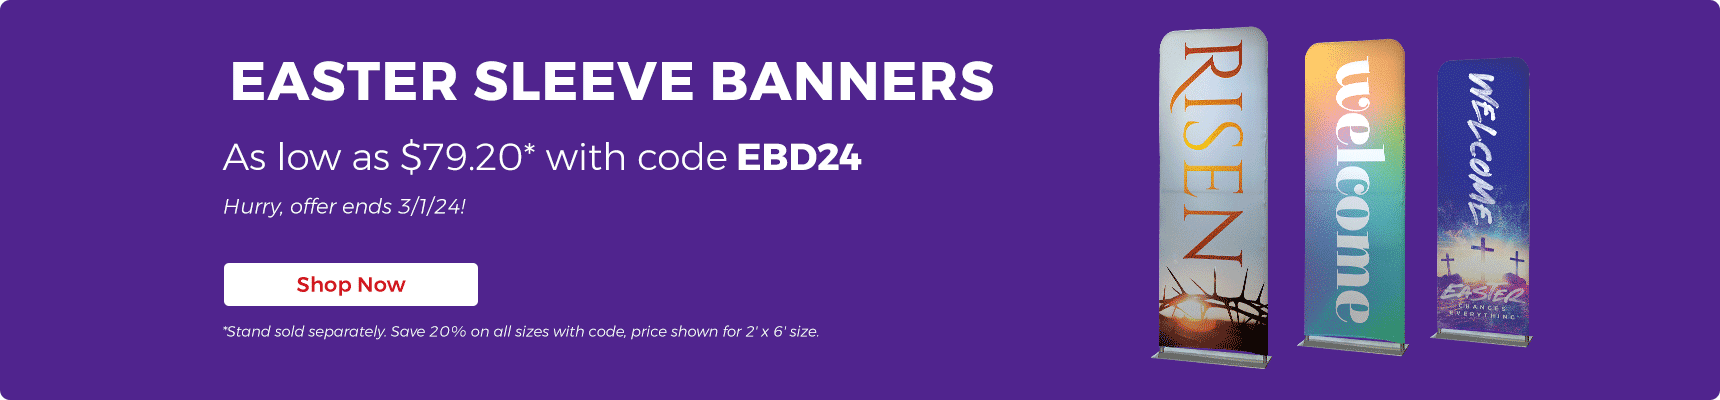 Indoor Sleeve Banners as low as $79.20 with Discount Code EBD24